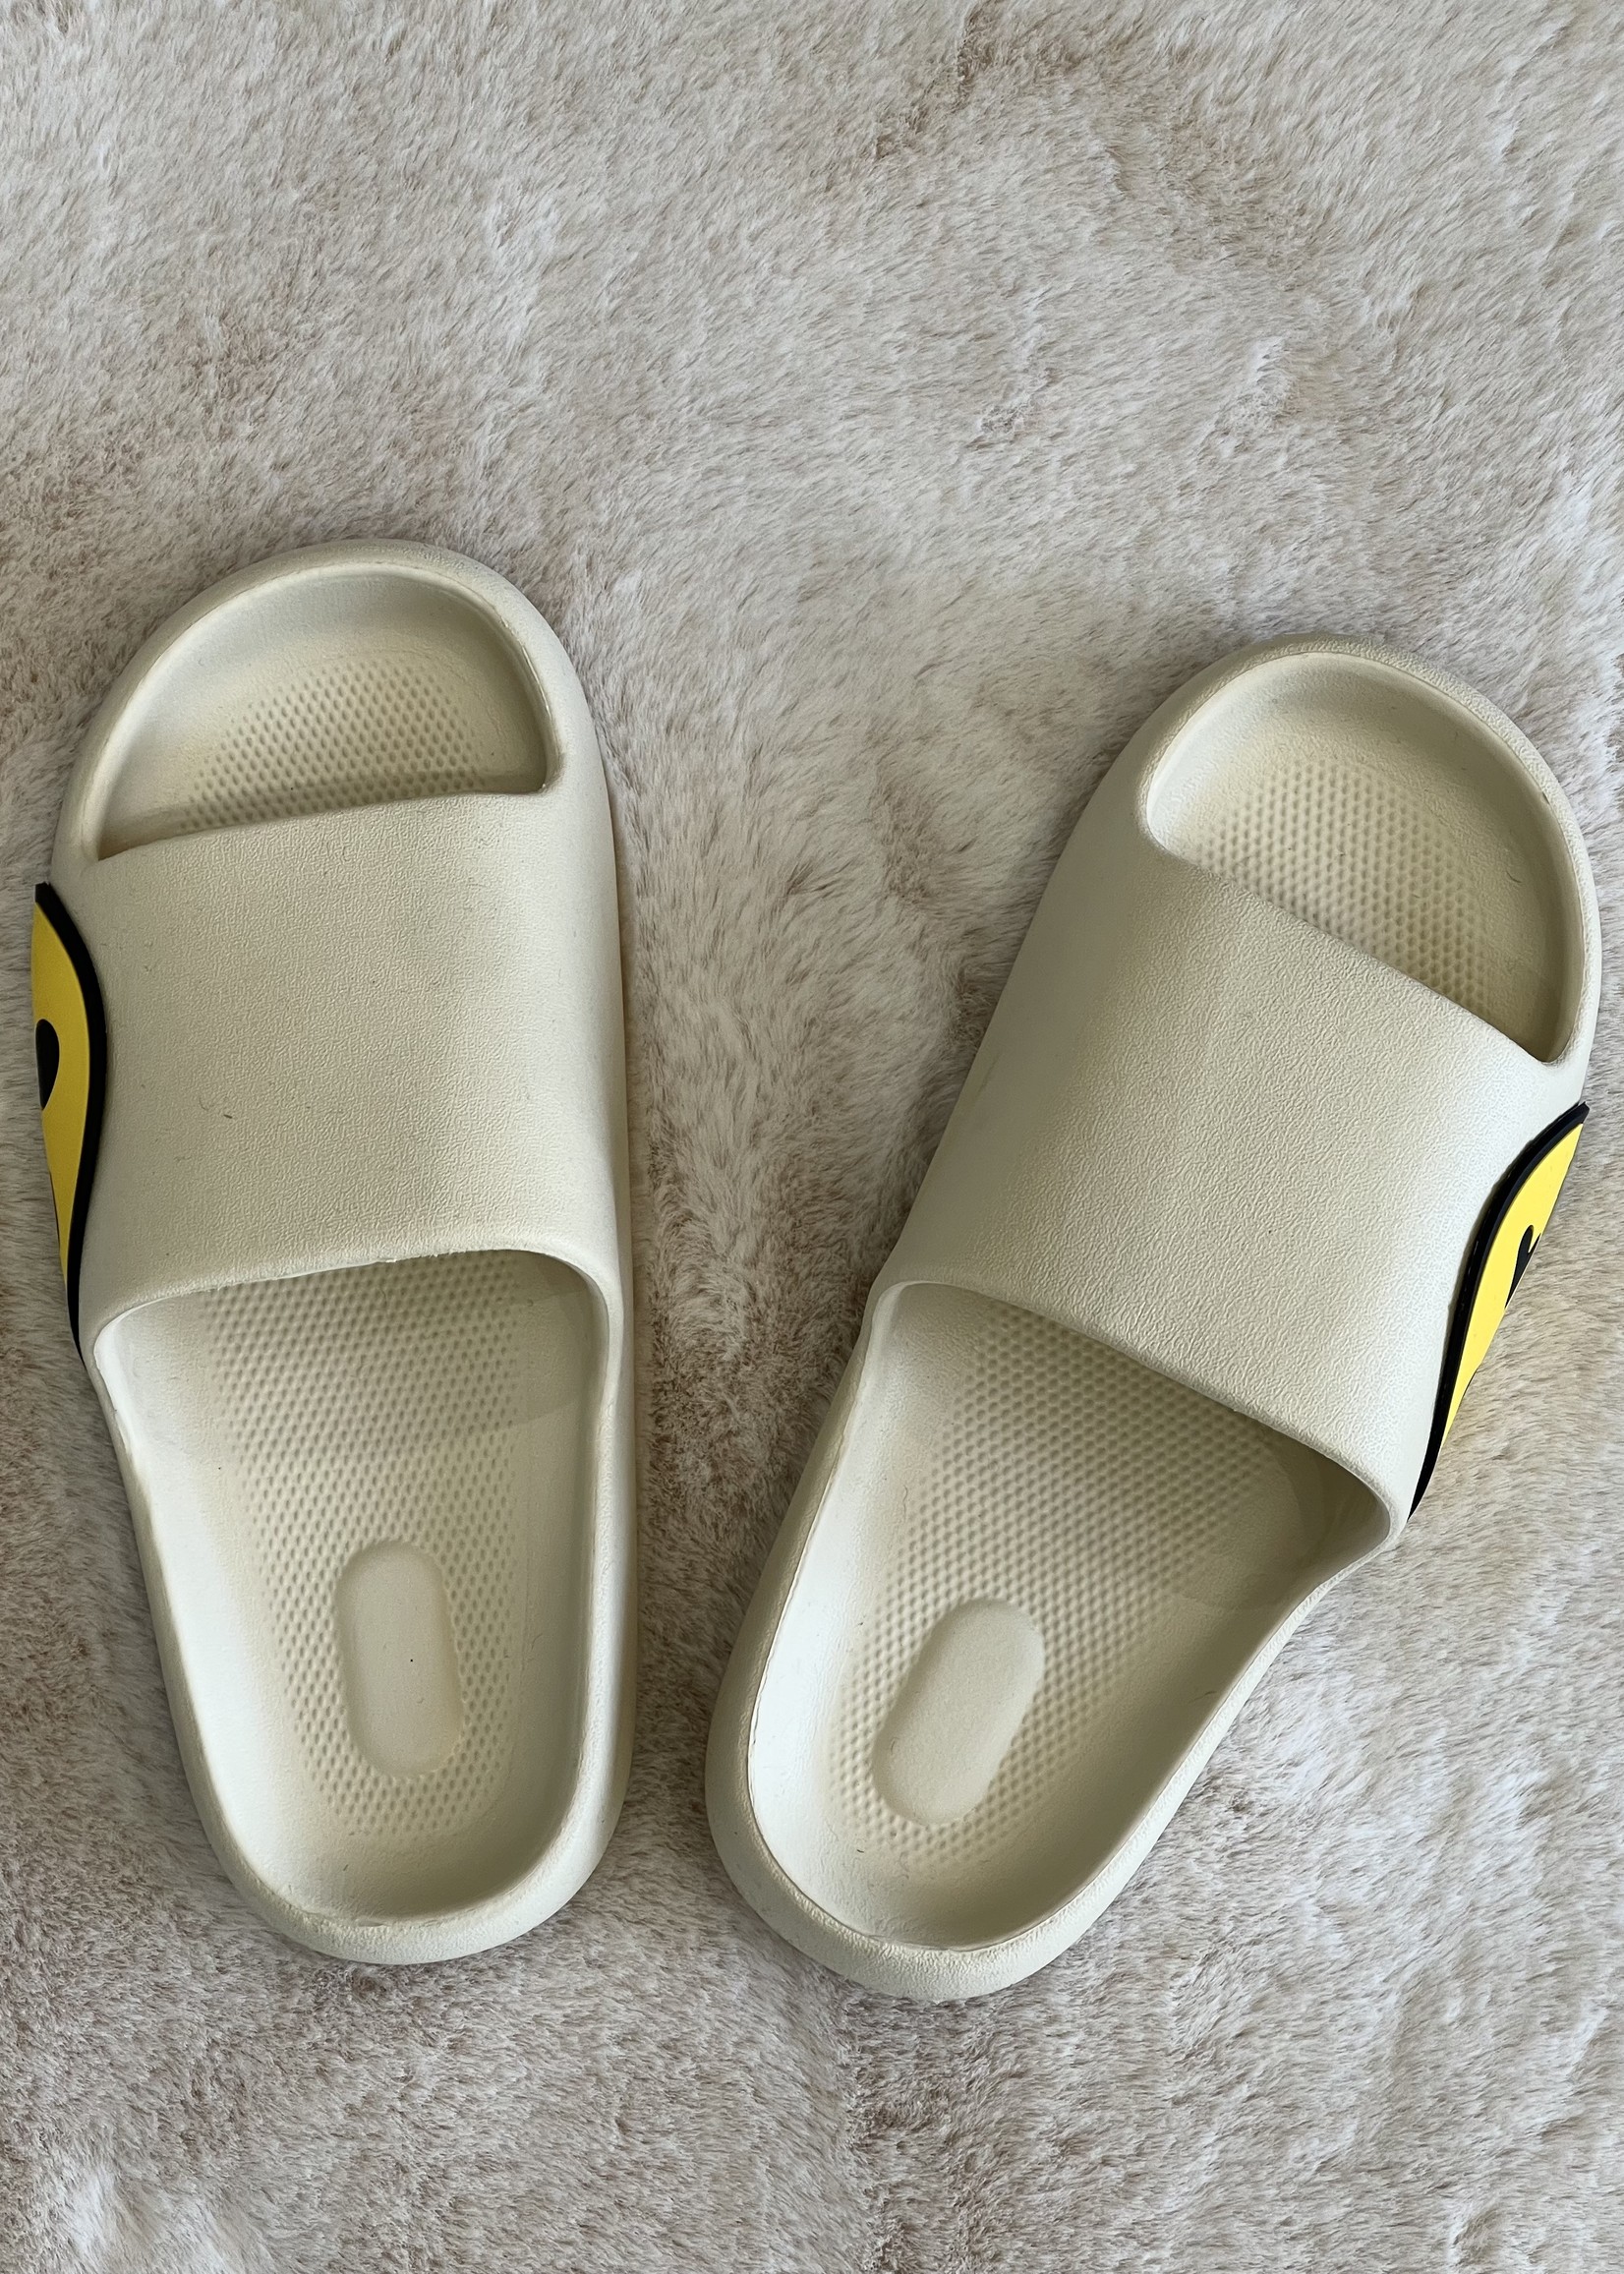 melody apparel melody happy face slides